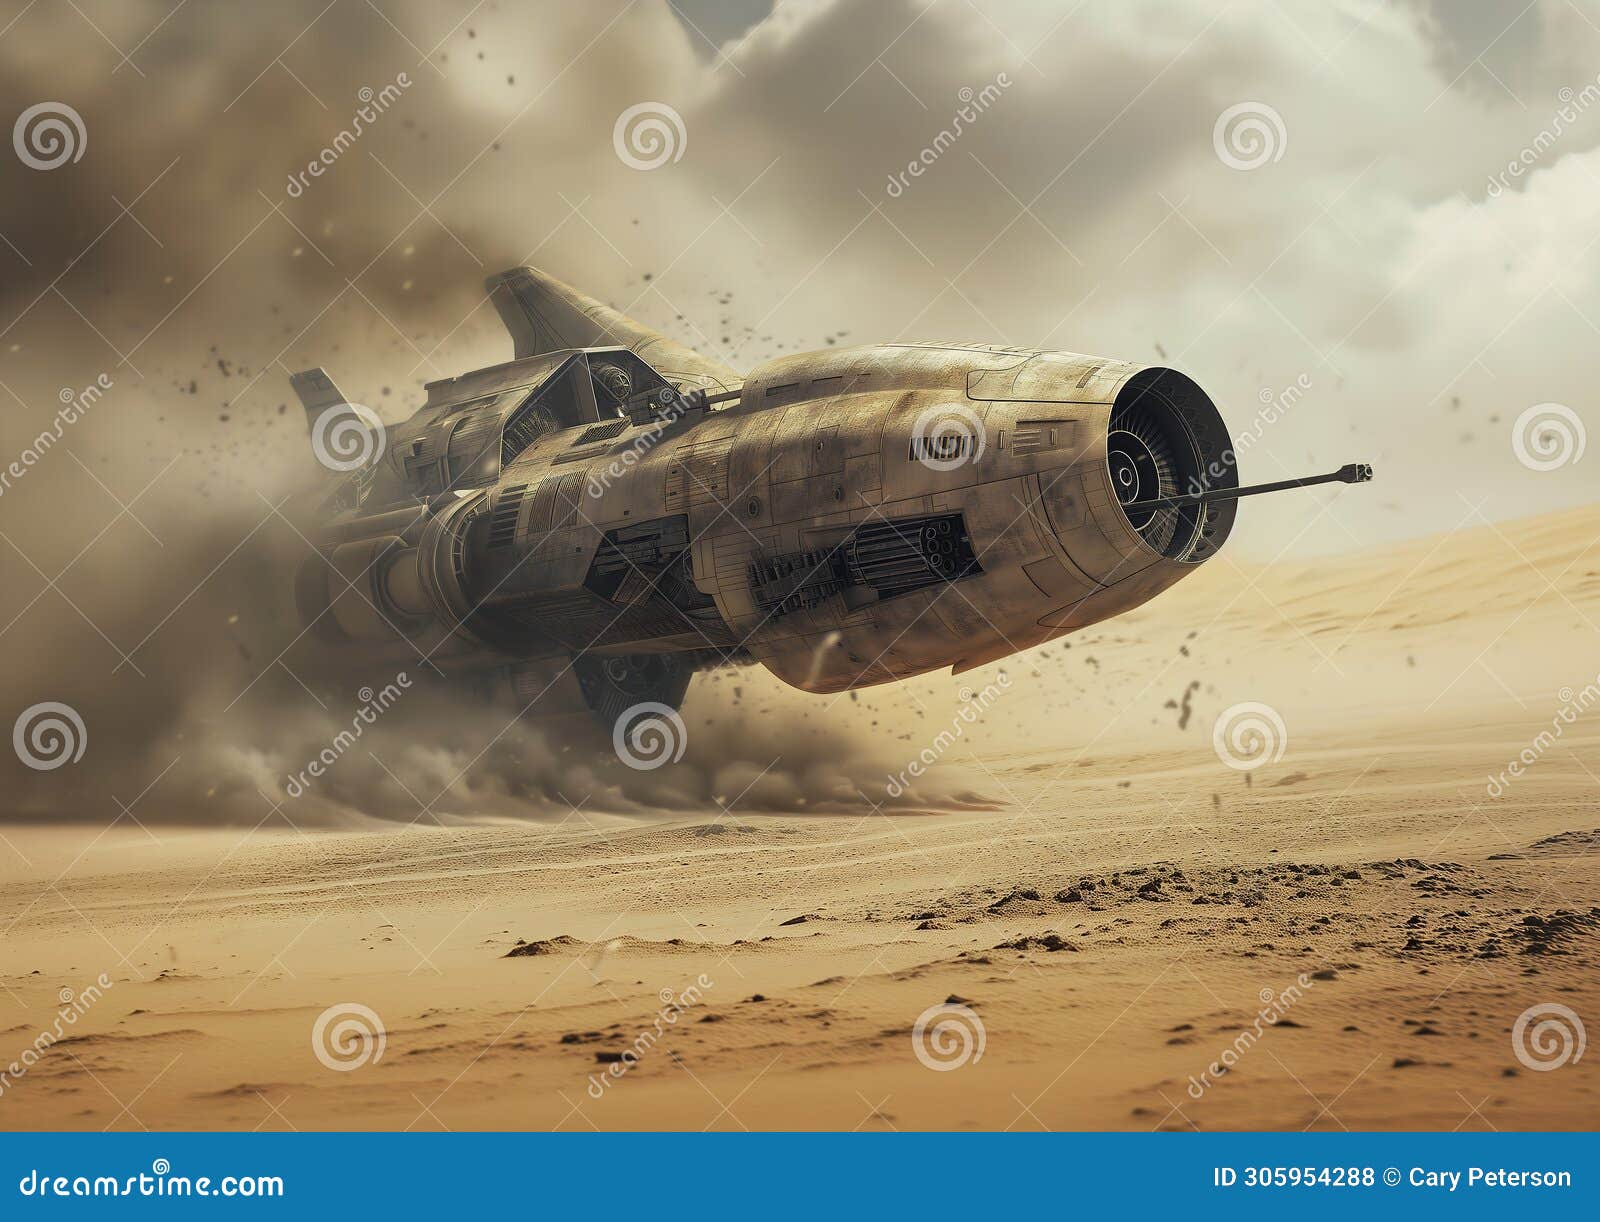 spaceship desert smoke coming out promotional solo sank action heroic compositing raider flying machinery